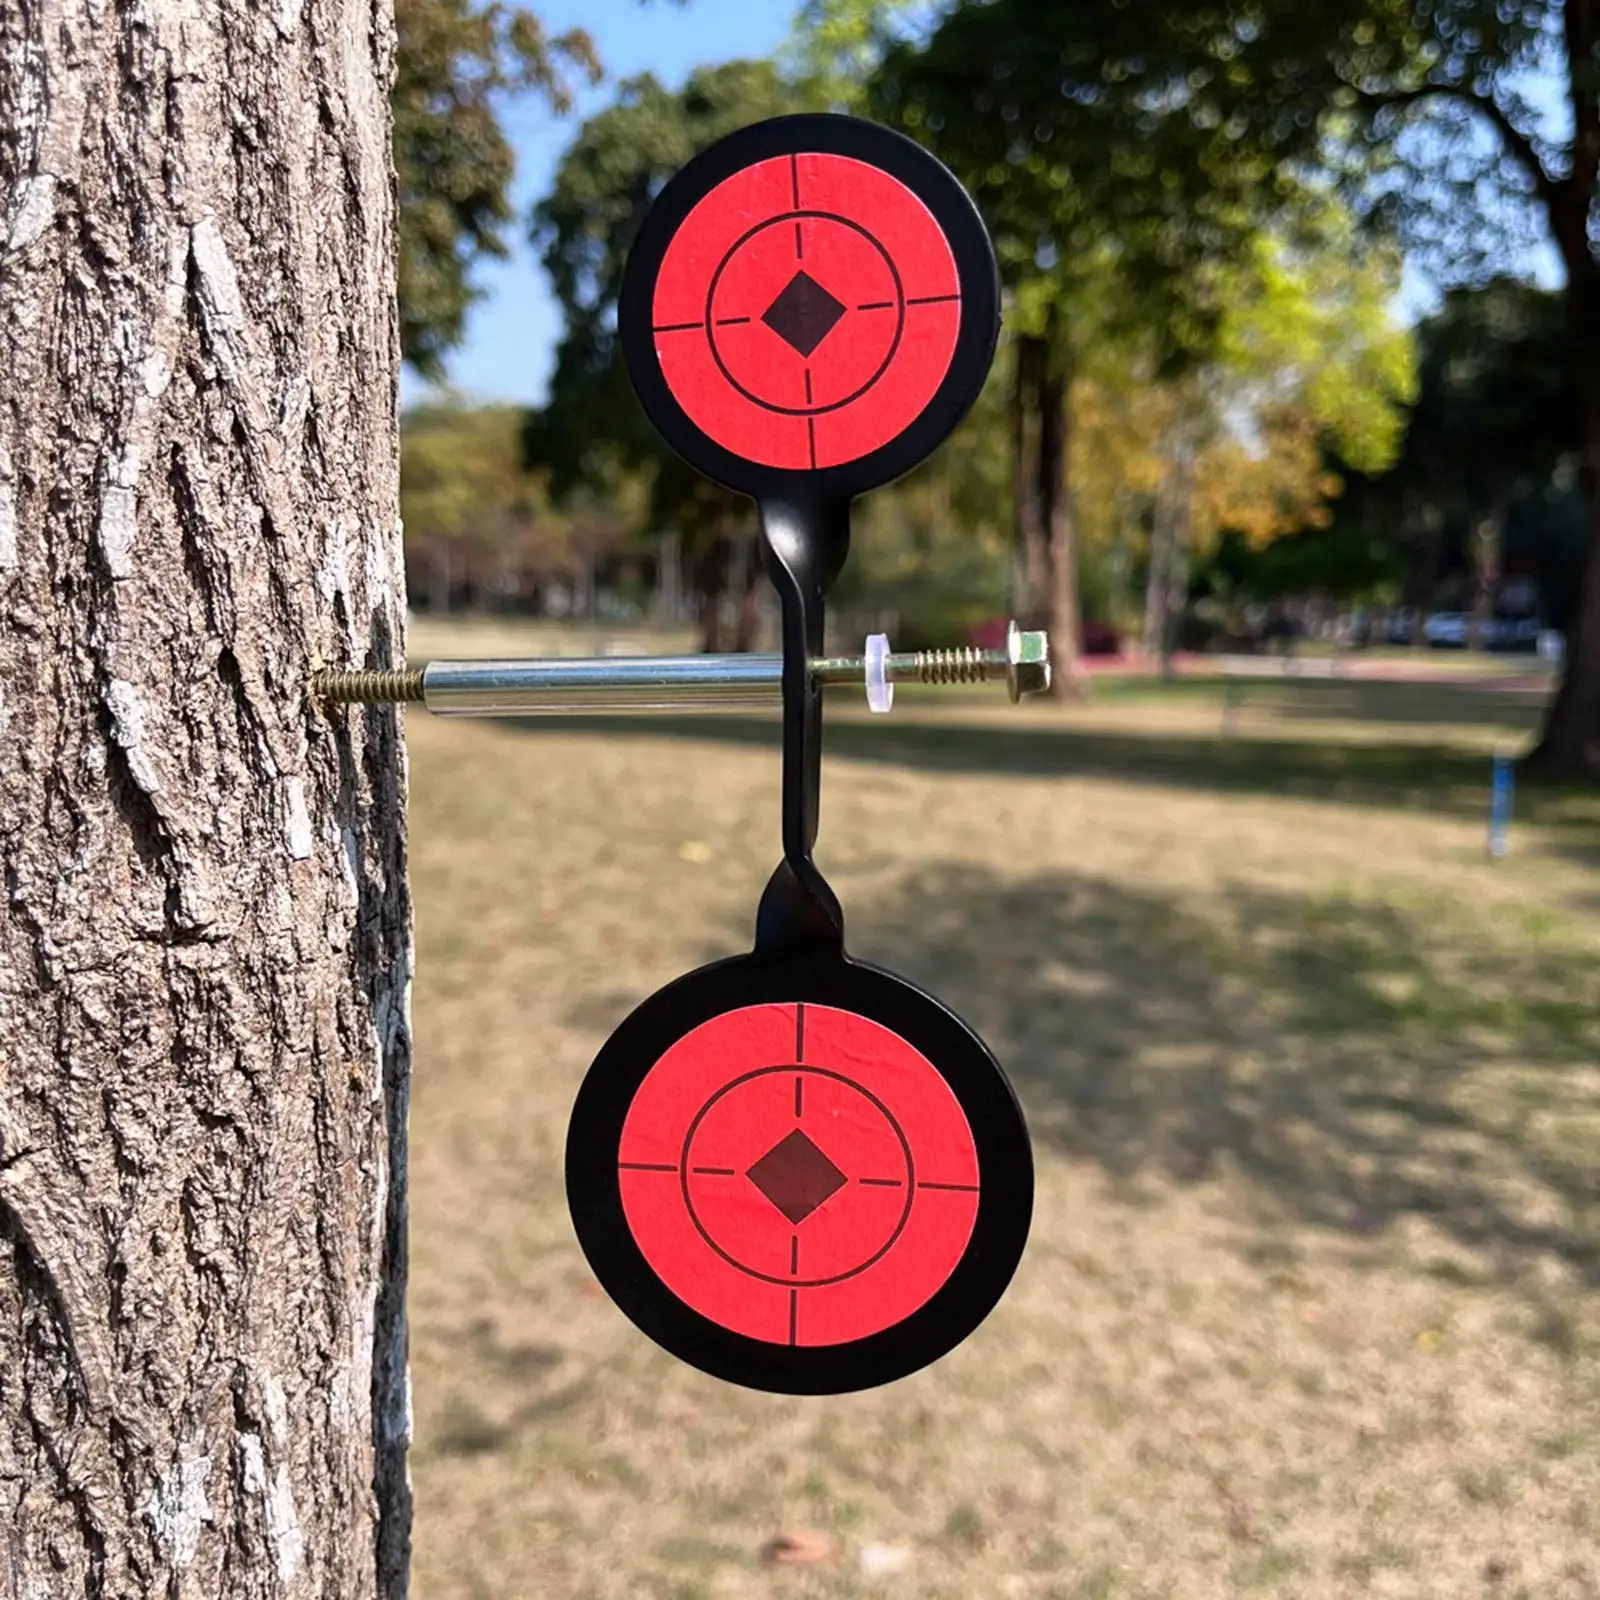 Resetting Target Reset  for Hunting Training Practice